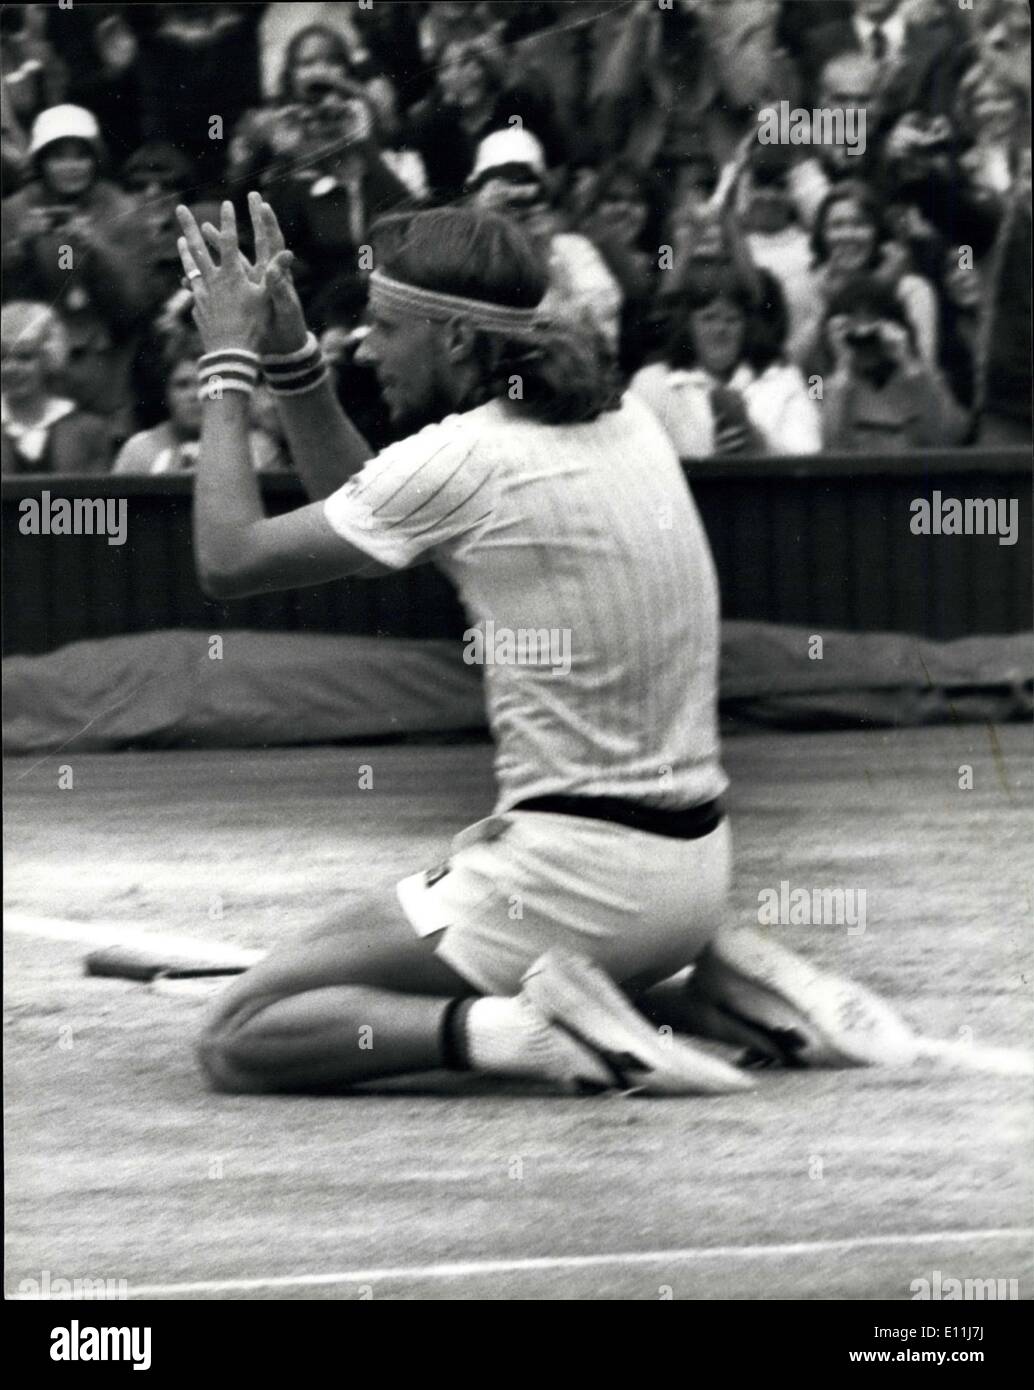 Jul. 08, 1978 - Bjorn Borg wins the Men's singles title for the third time running: Bjorn Borg of Sweden won the men's singles title on the centre court at Wimbledon today when he beat Jimmy Connors of America 6-2 6-2 6-3. This equals the record held by Fred Perry of winning the singles title three years in a row. Photo shows Bjorn Borg goes down on his knees and prays after beat Jimmy Connors at Wimbledon today. Stock Photo